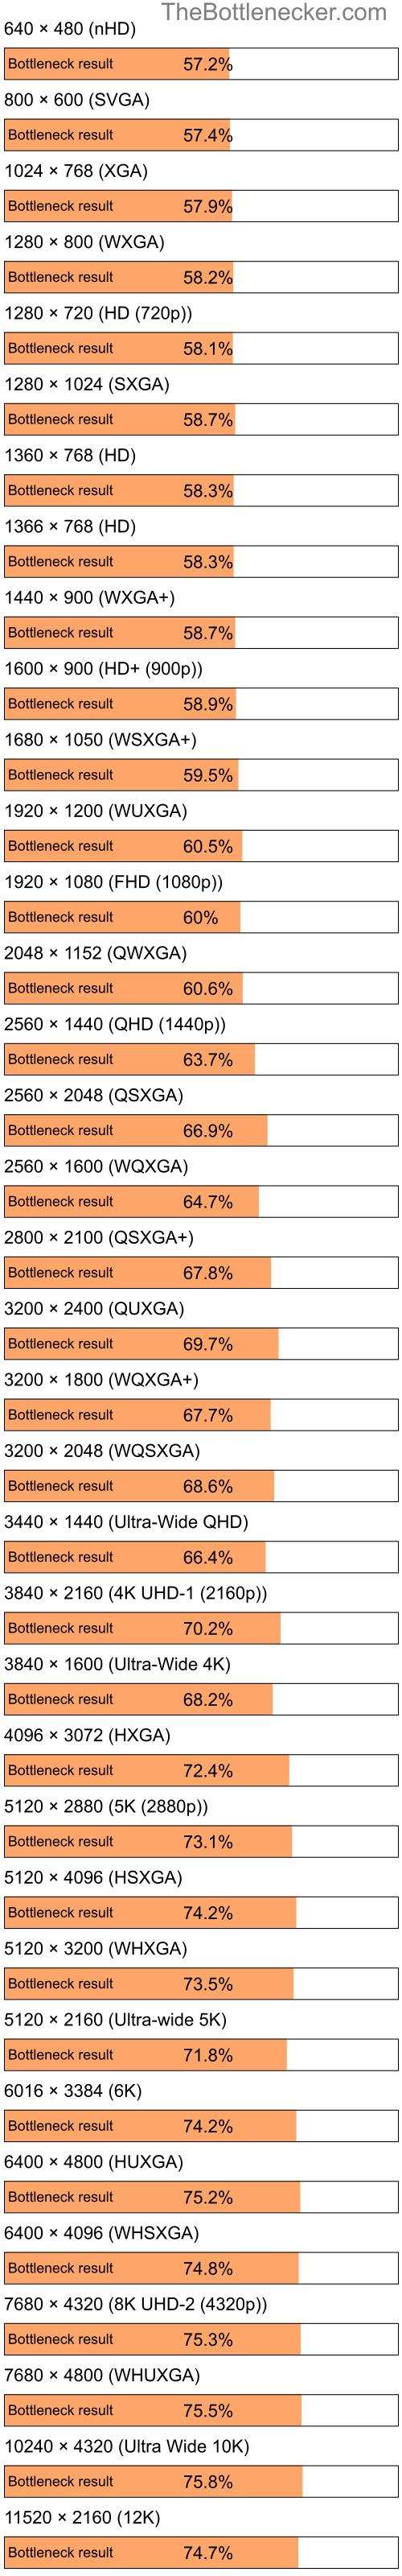 Bottleneck results by resolution for Intel Pentium 4 and NVIDIA GeForce G105M in General Tasks